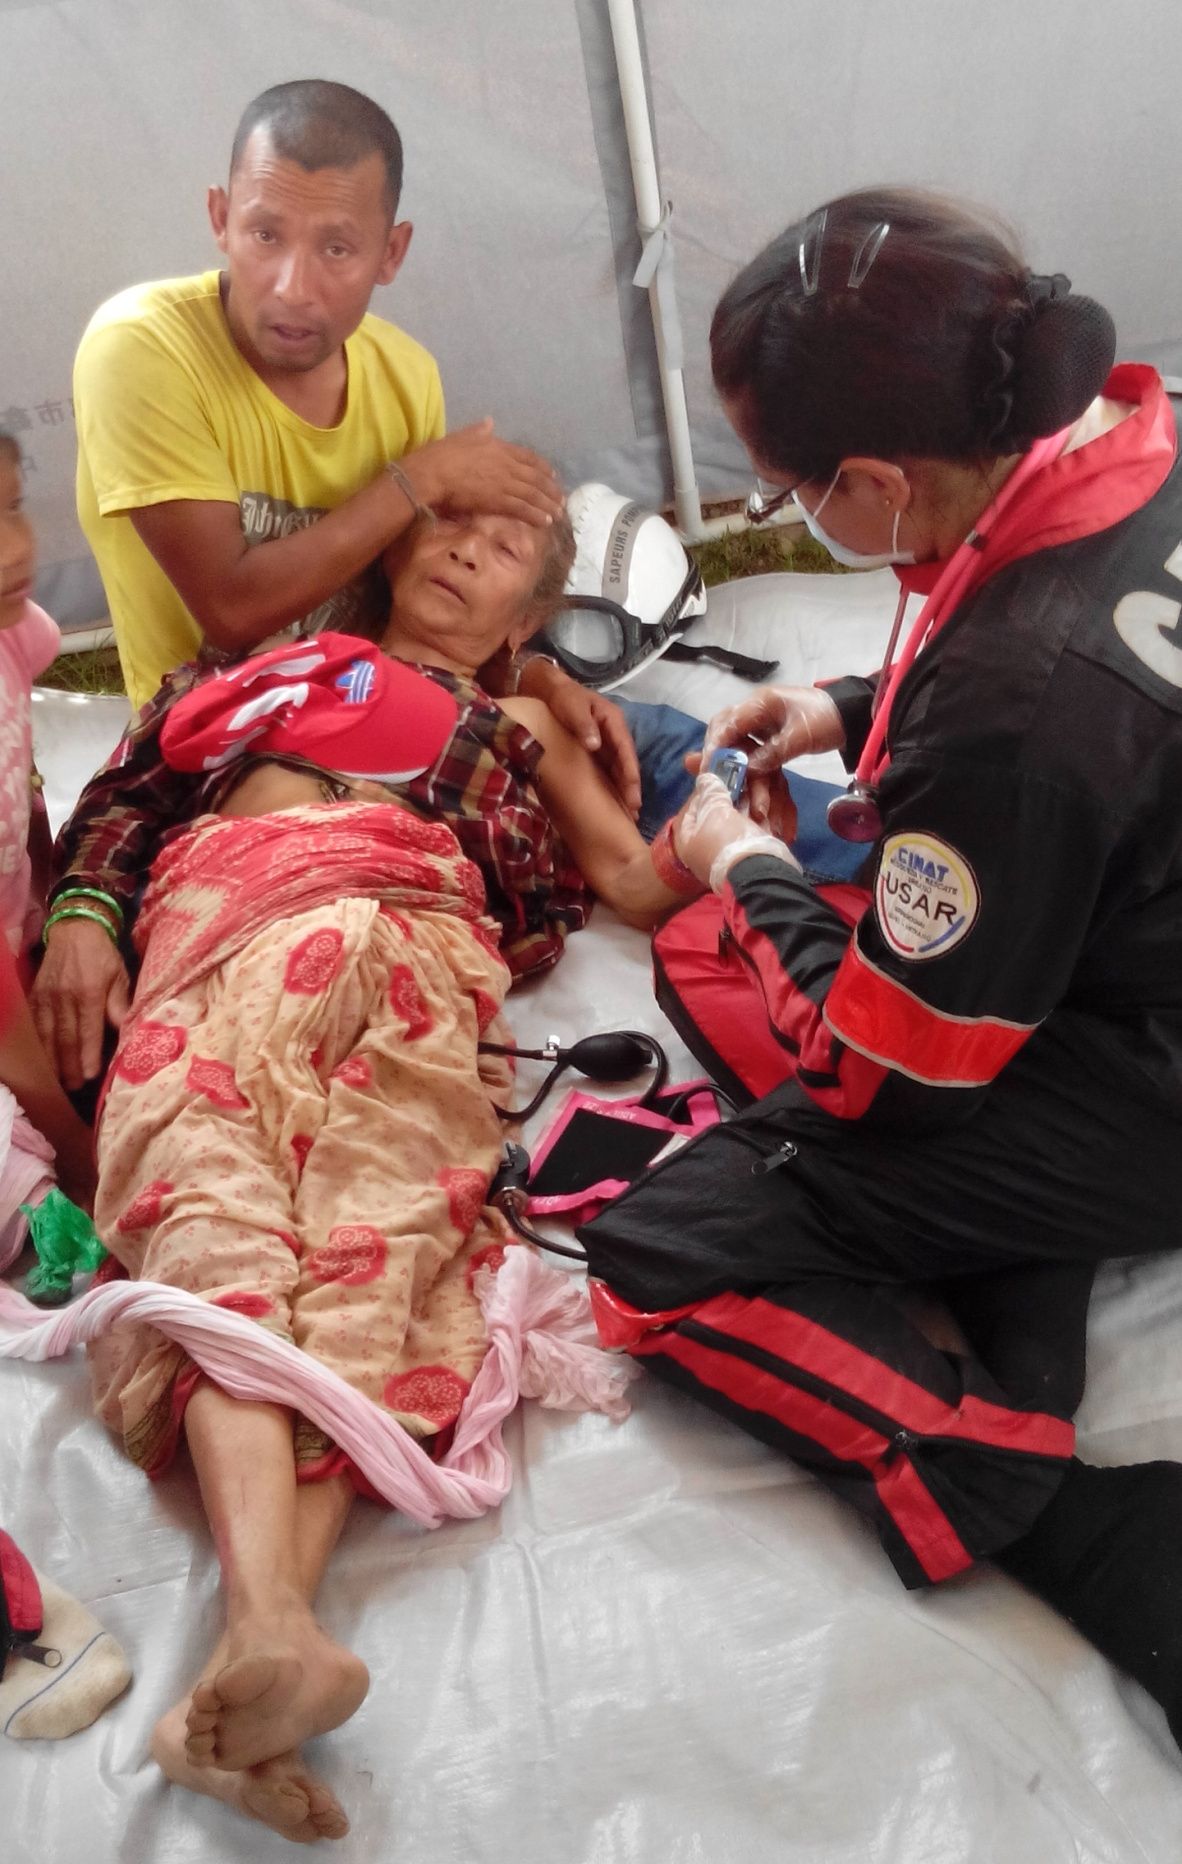 A Nepalese woman receiving first aid.